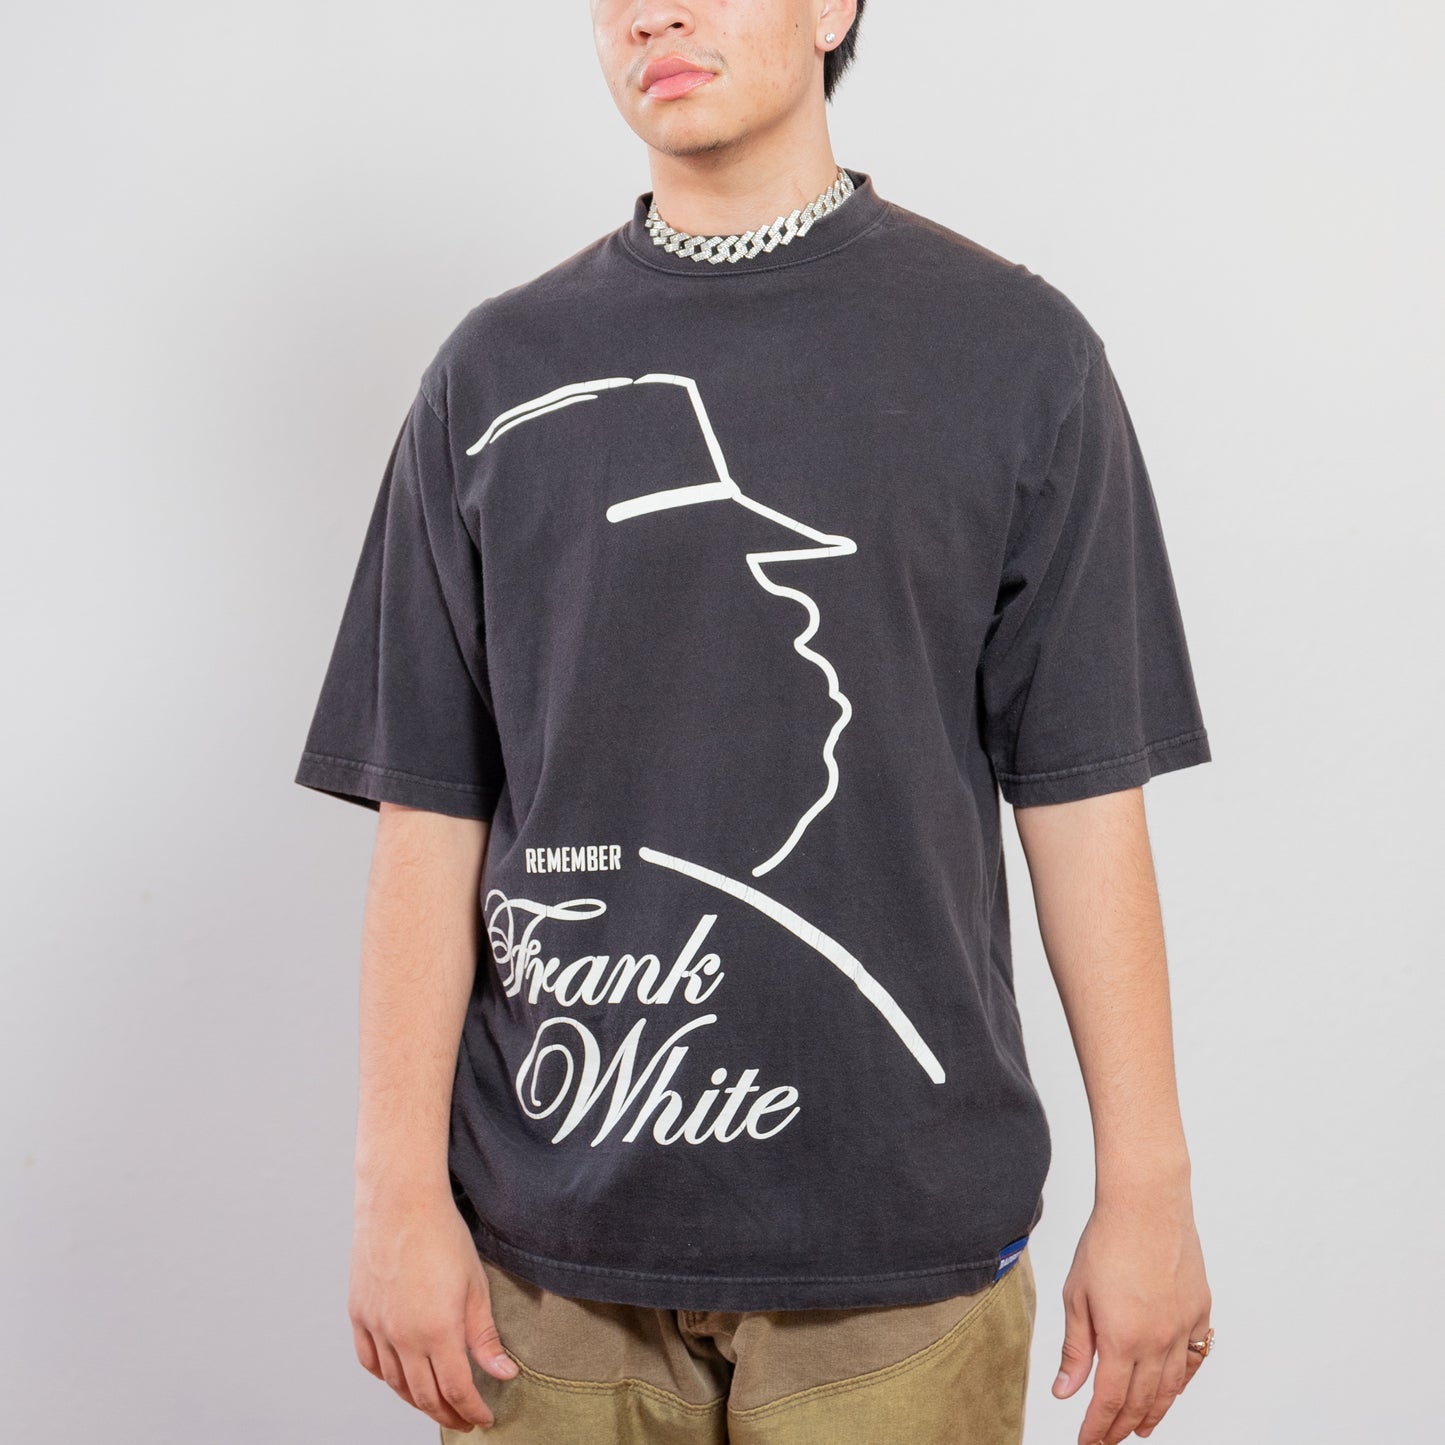 2005 Remember Frank White The Notorious BIG Memorial Tee